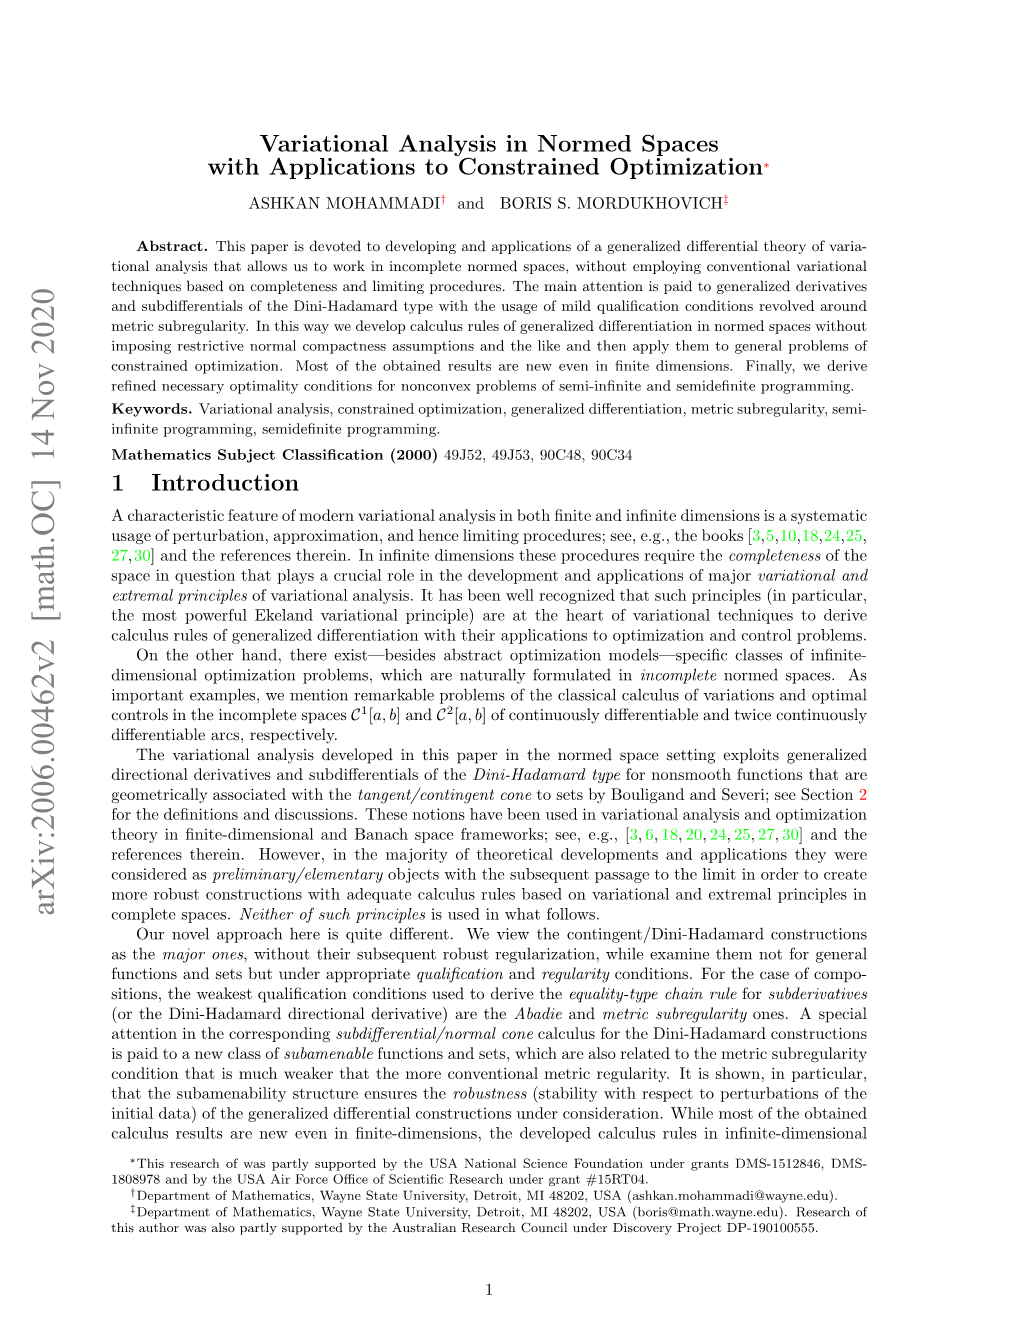 Variational Analysis in Normed Spaces with Applications to Constrained